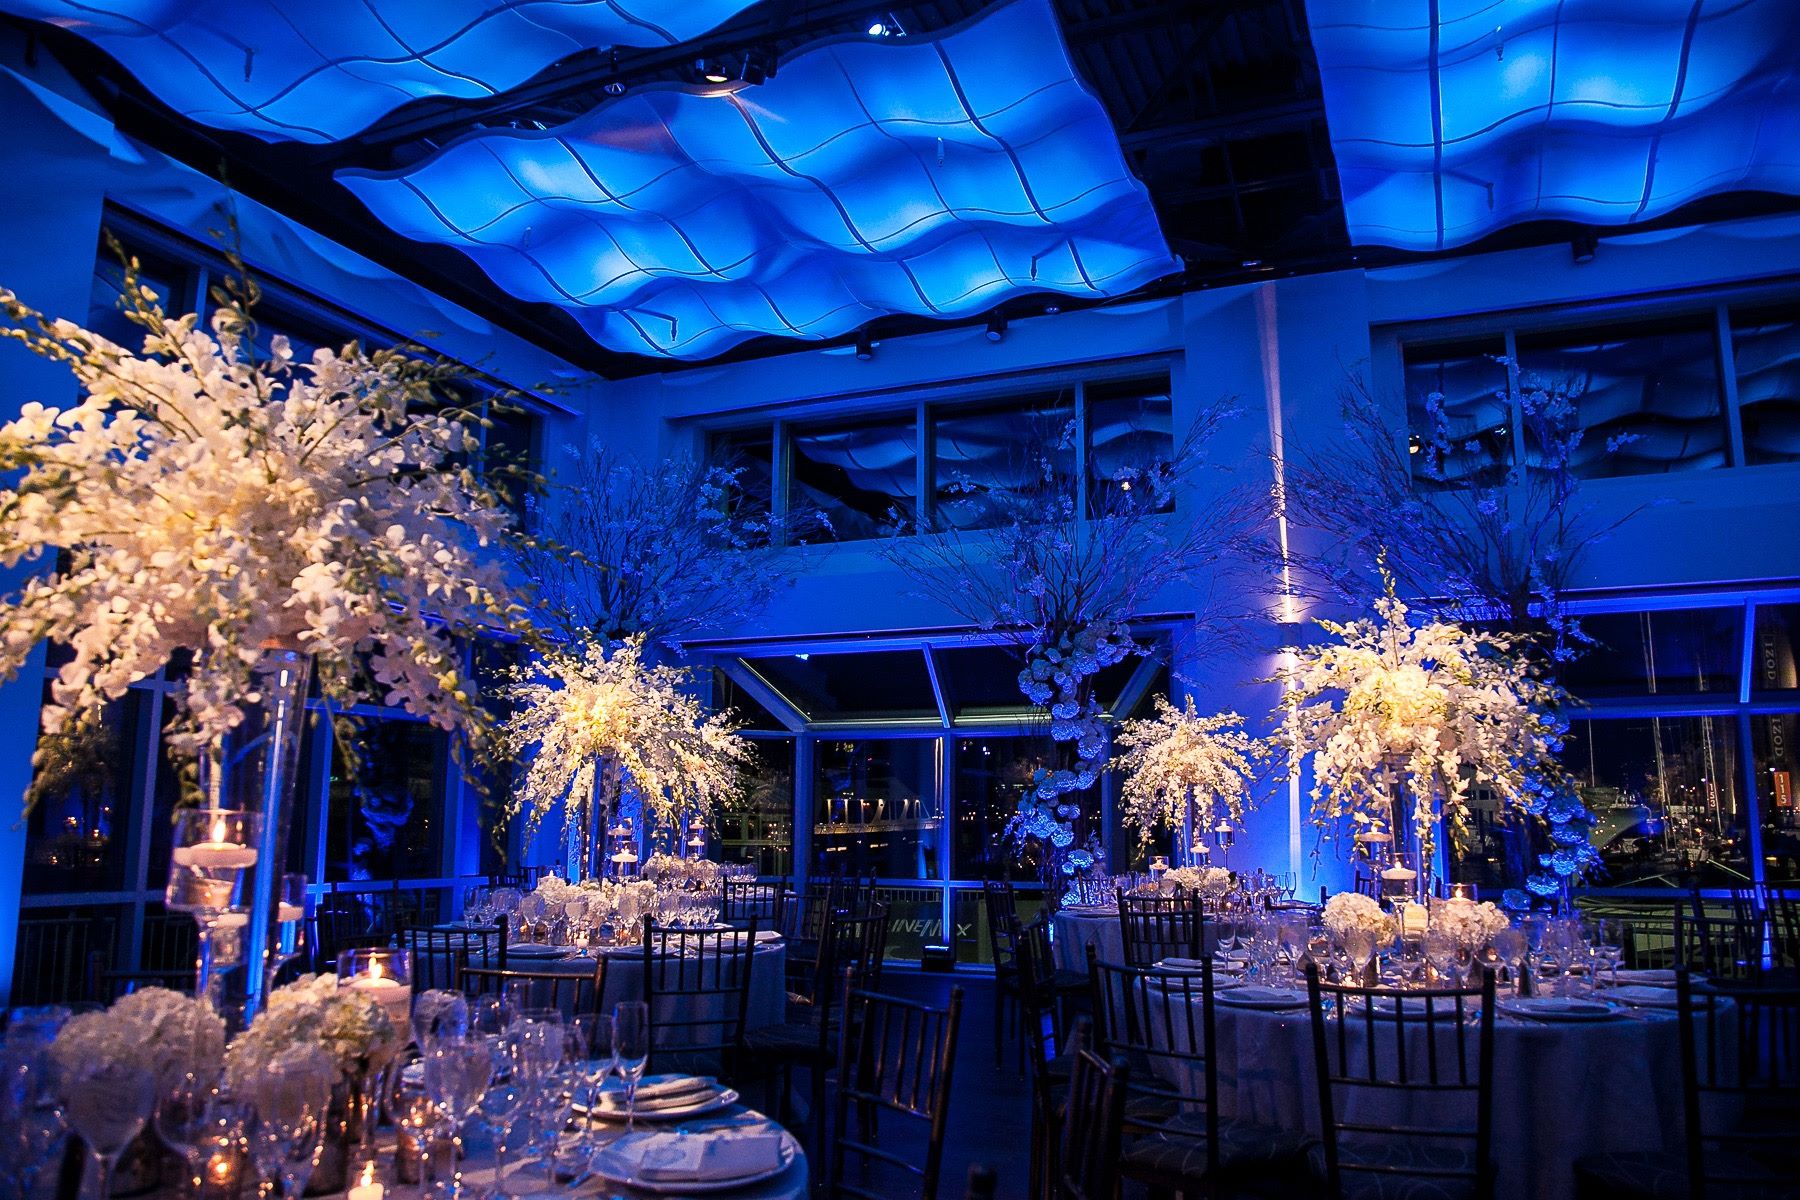 Current set with dining tables tall flower center pieces and blue lights over